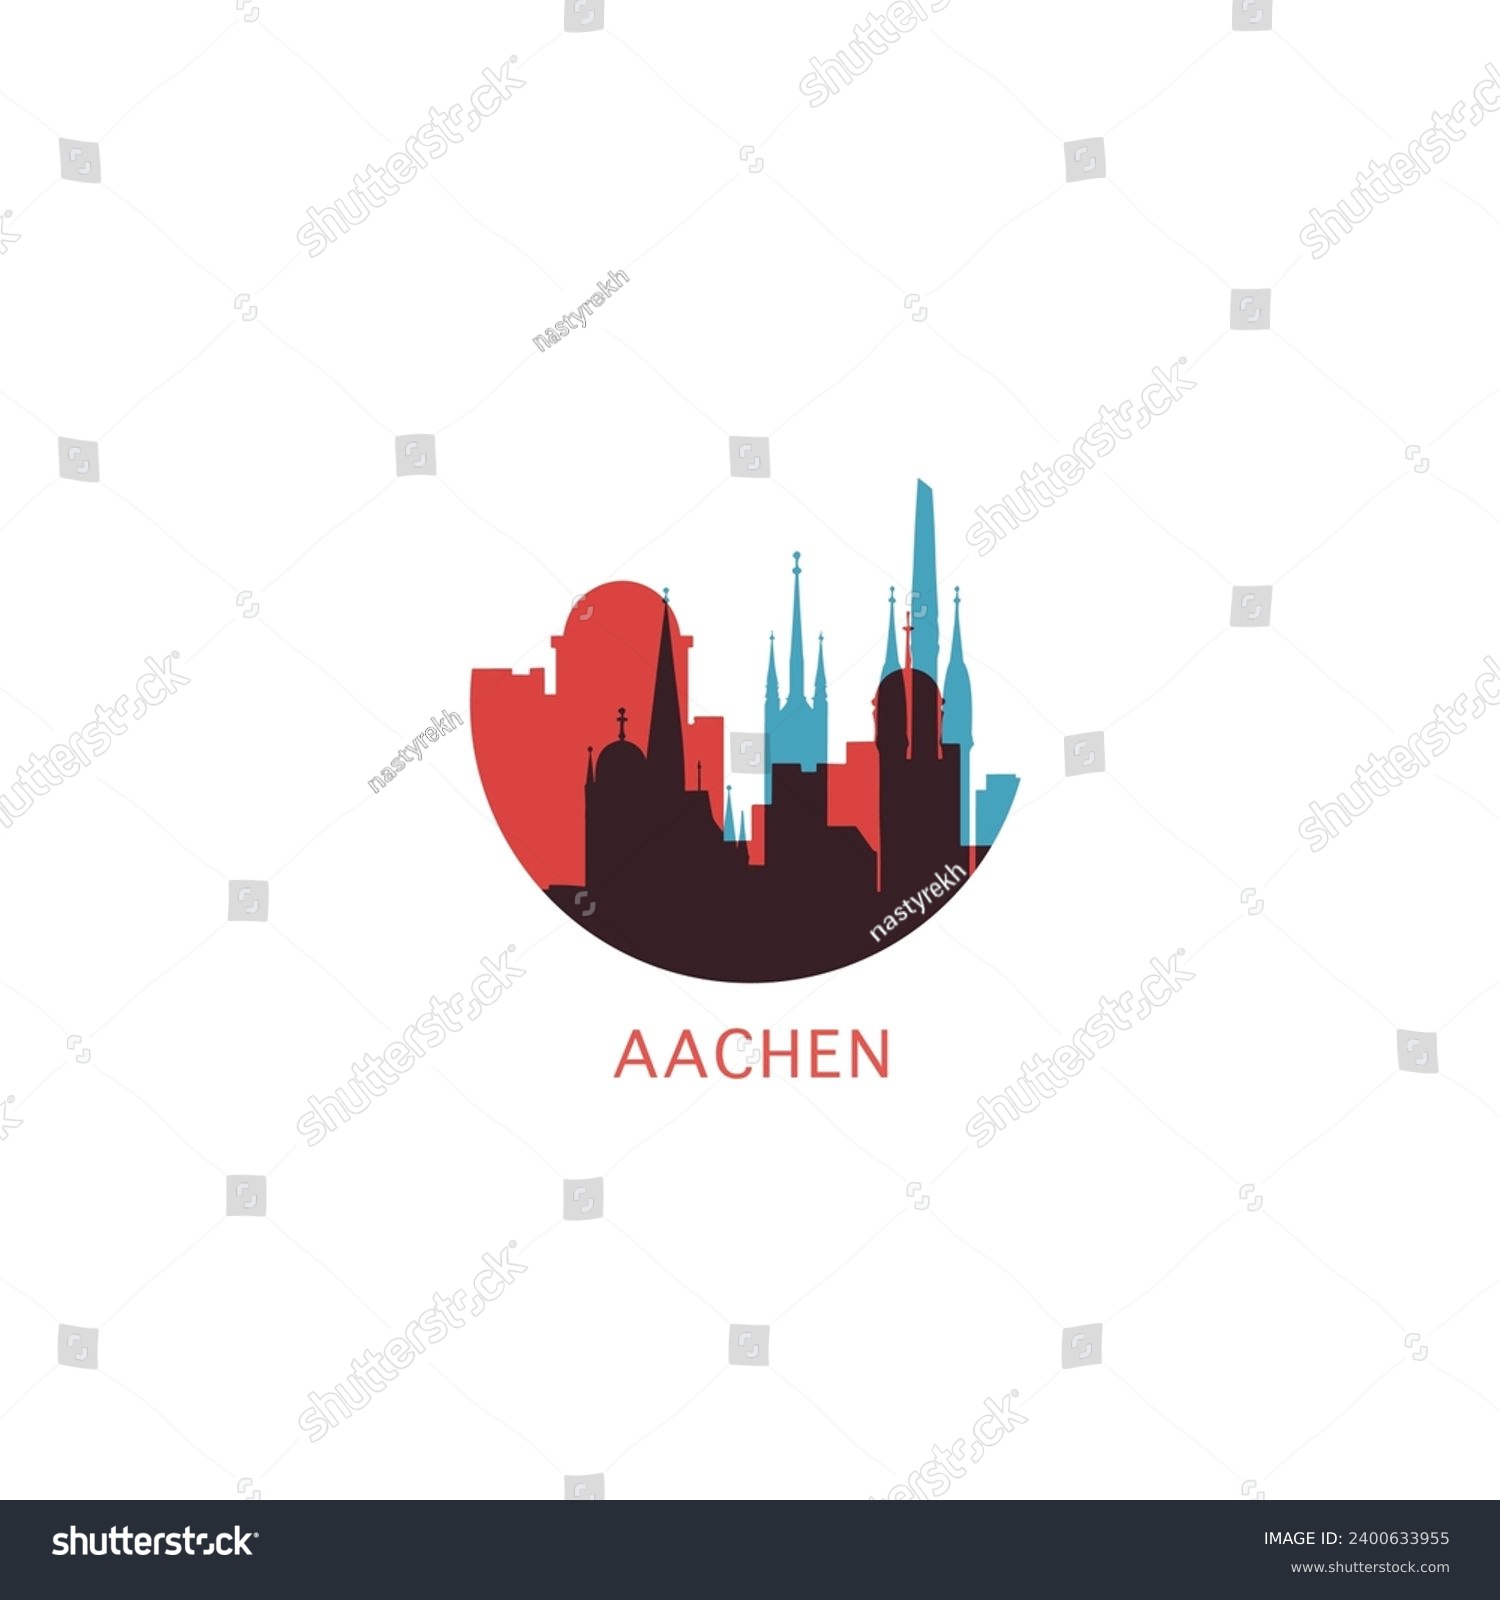 SVG of Aachen cityscape skyline city panorama vector flat modern logo icon. Germany North Rhine-Westphalia emblem idea with landmarks and building silhouettes svg